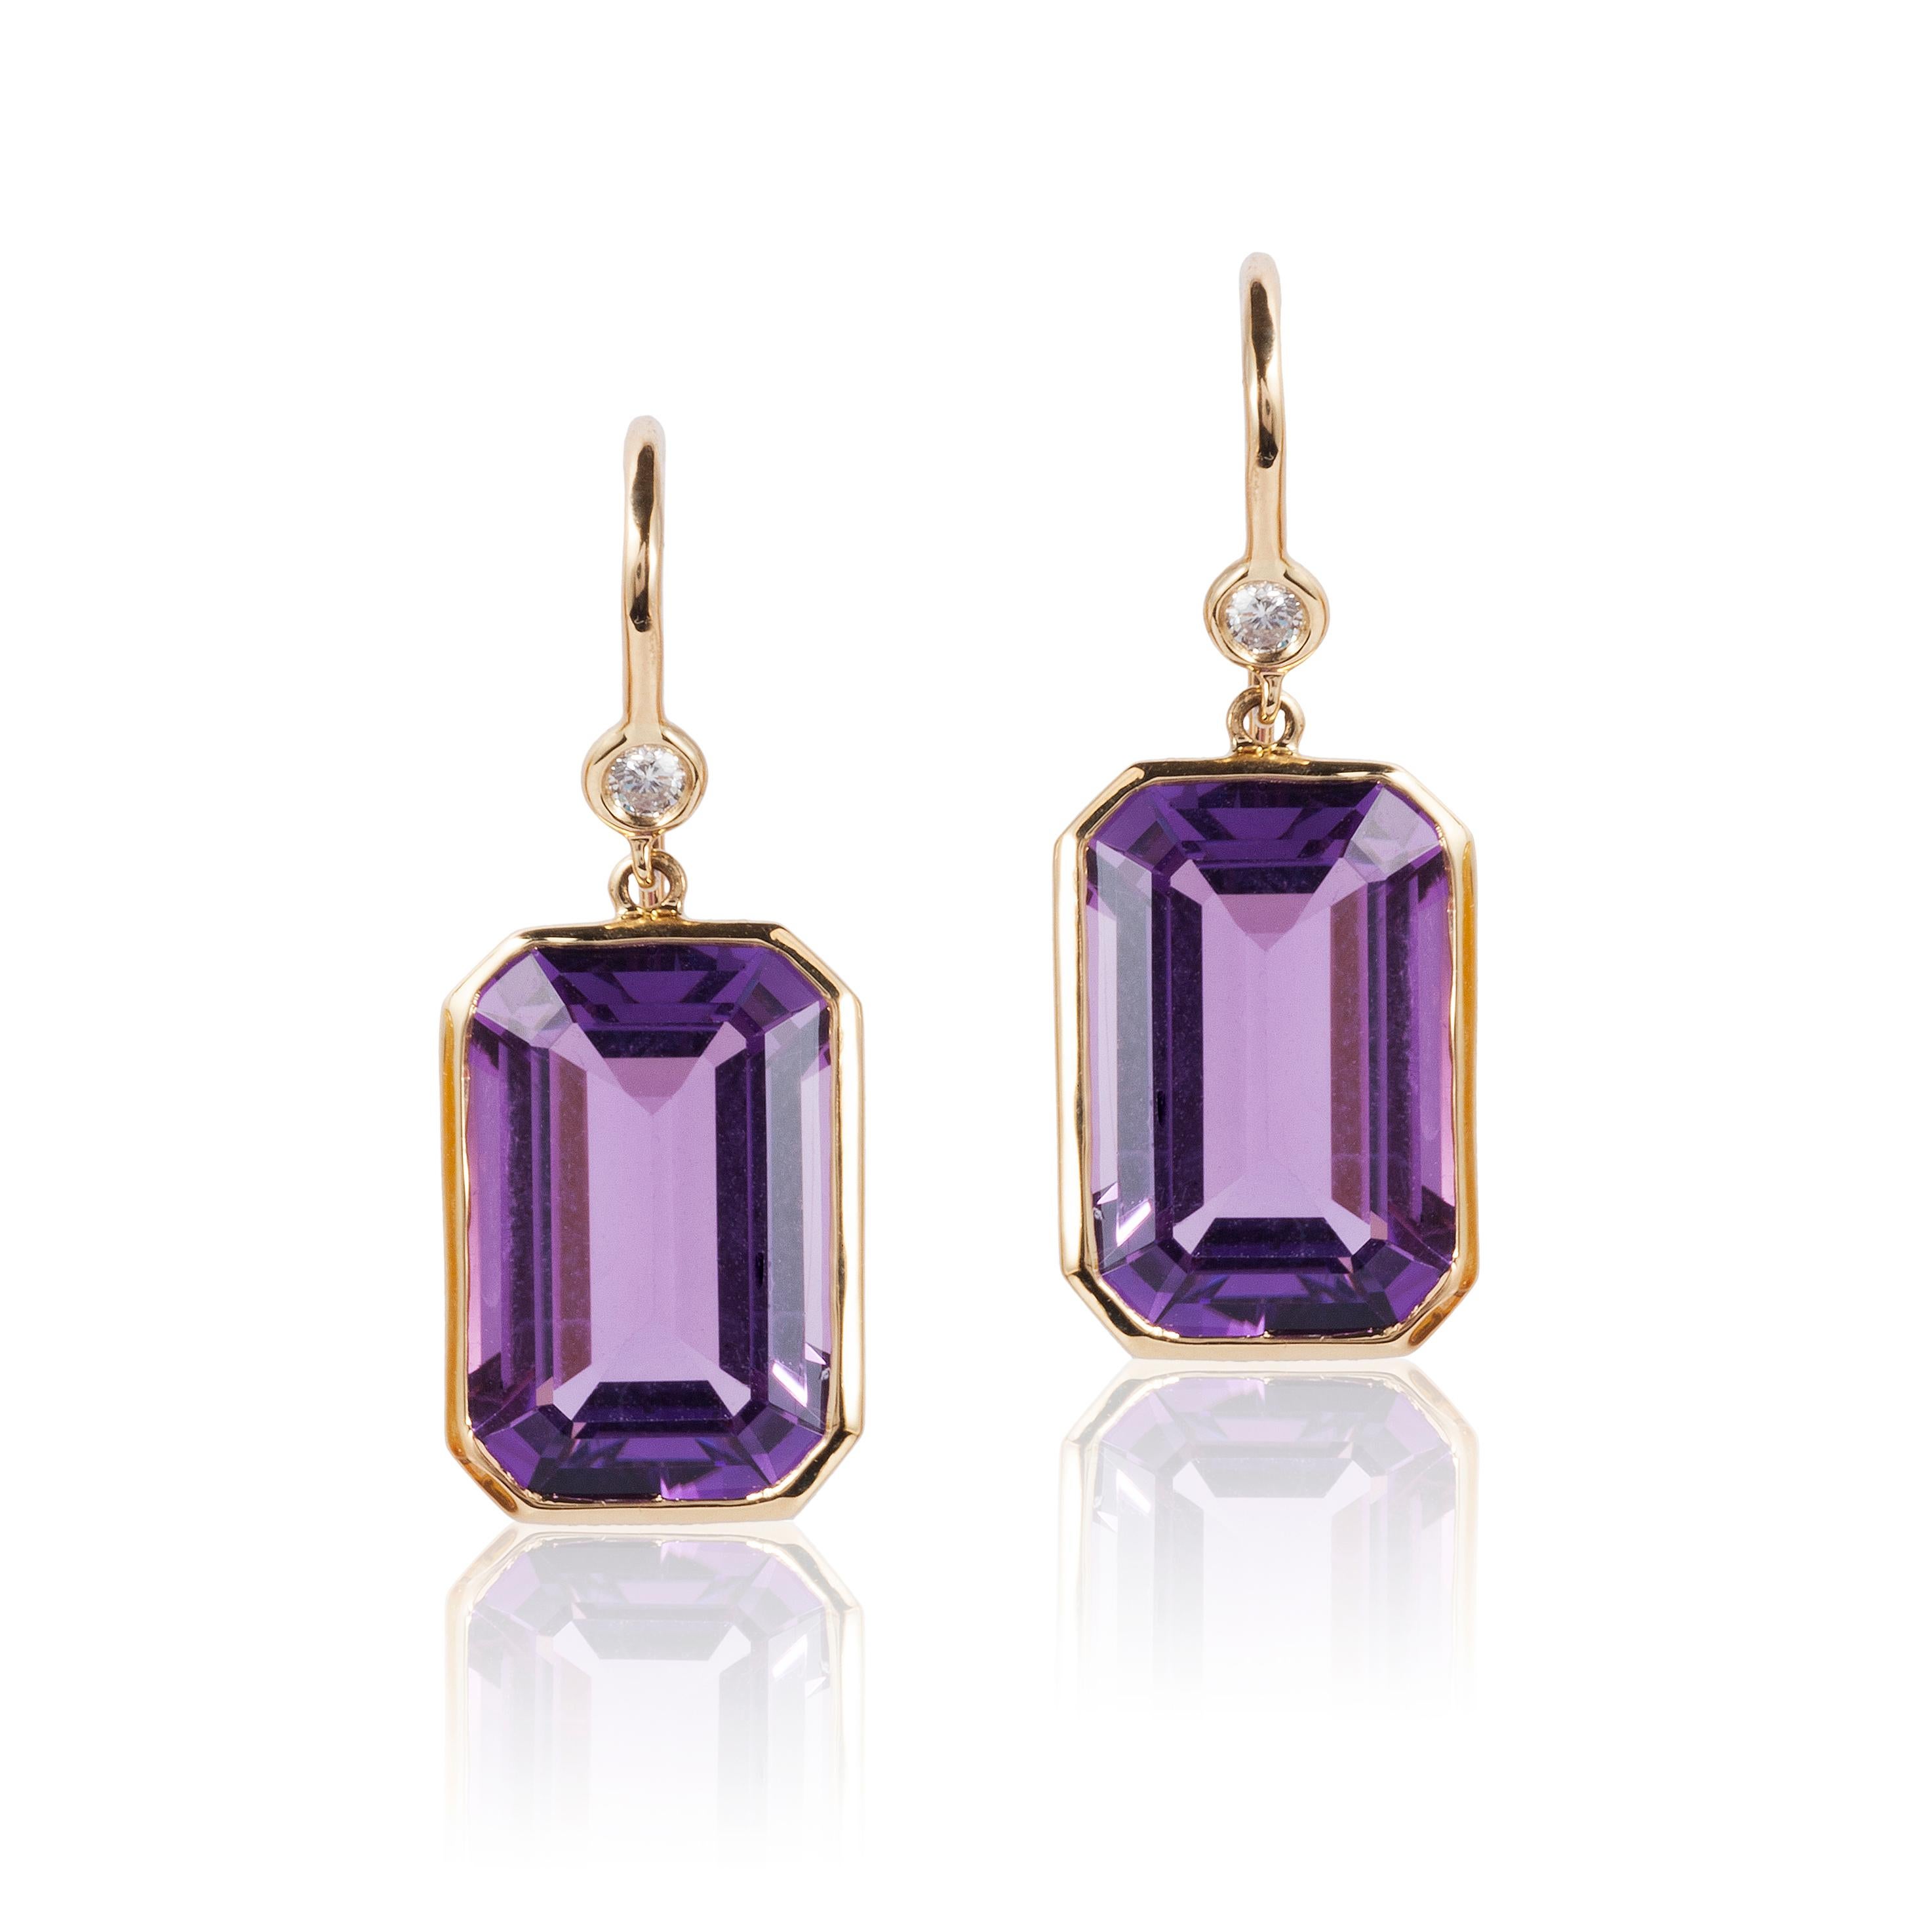 Amethyst Emerald Cut Earrings with Diamond on Wire in 18K Yellow Gold from 'Gossip' Collection

Stone Size: 15 x 10 mm

Diamonds: G-H / VS, Approx Wt - 0.09 Cts